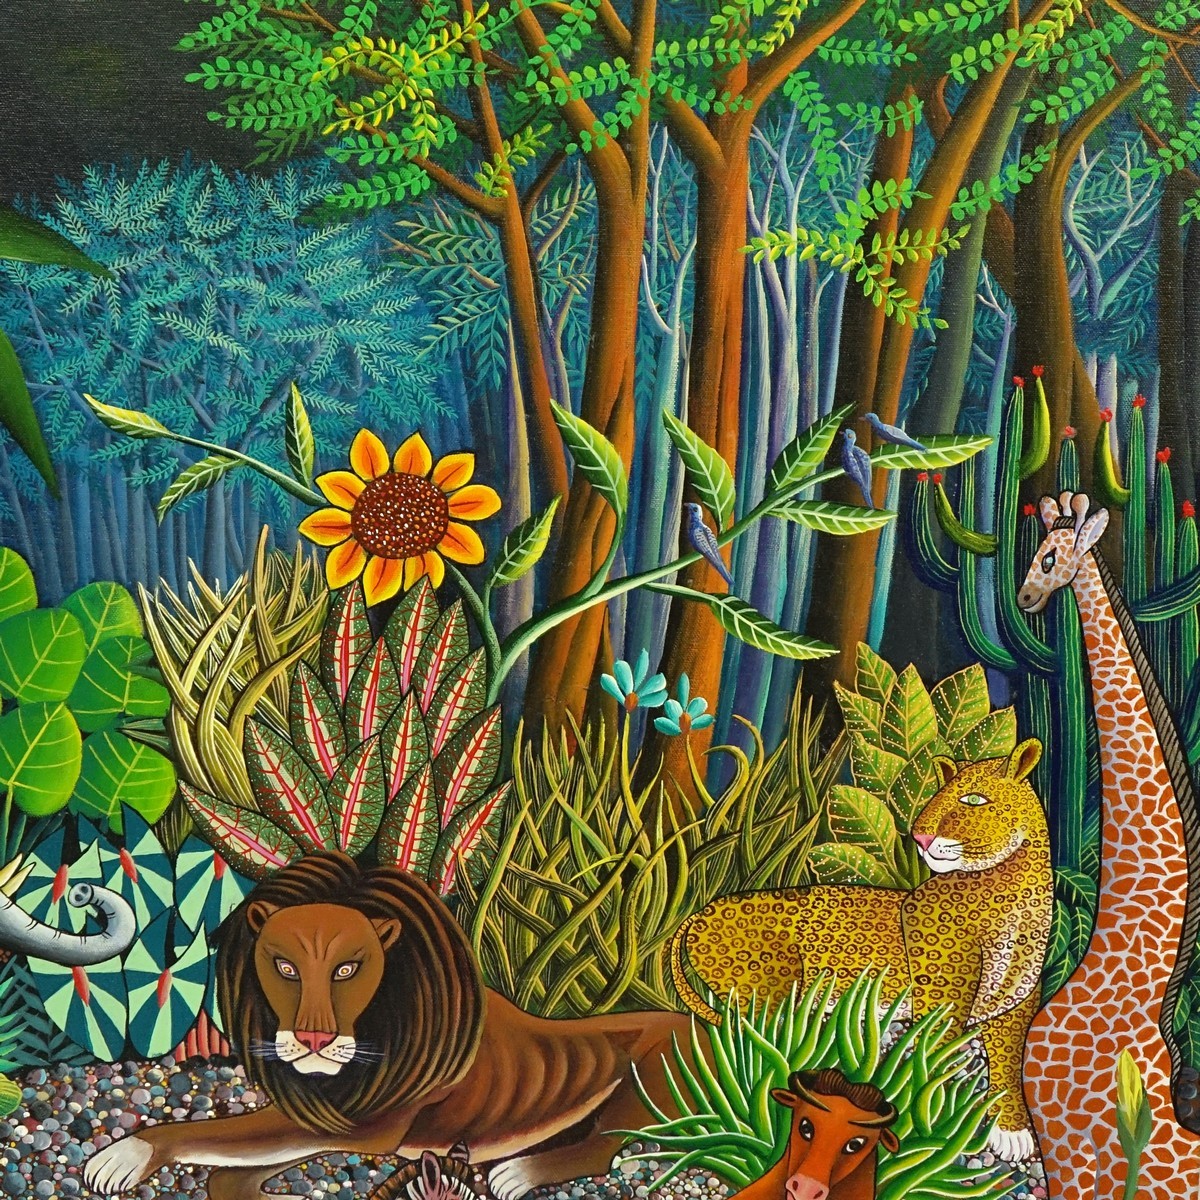 Fritz Saint-Jean, Haitian  (20th C) Oil on Canvas, Jungle Scene with Animals, Signed and Dated 1990 Lower Right. Artist information attached en verso.